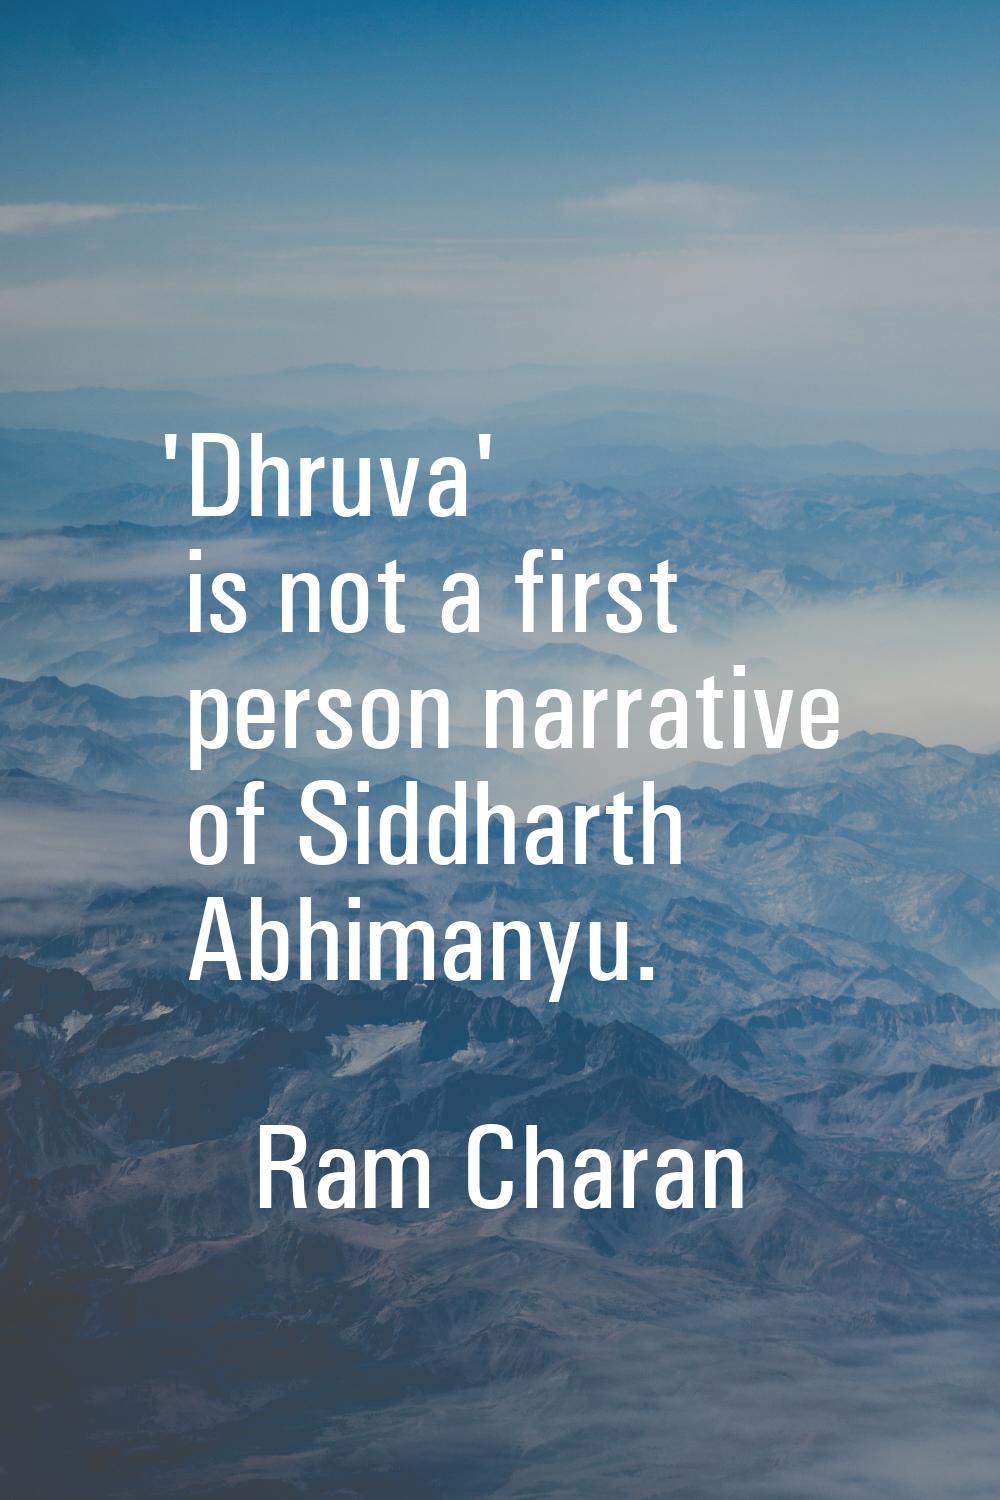 'Dhruva' is not a first person narrative of Siddharth Abhimanyu.